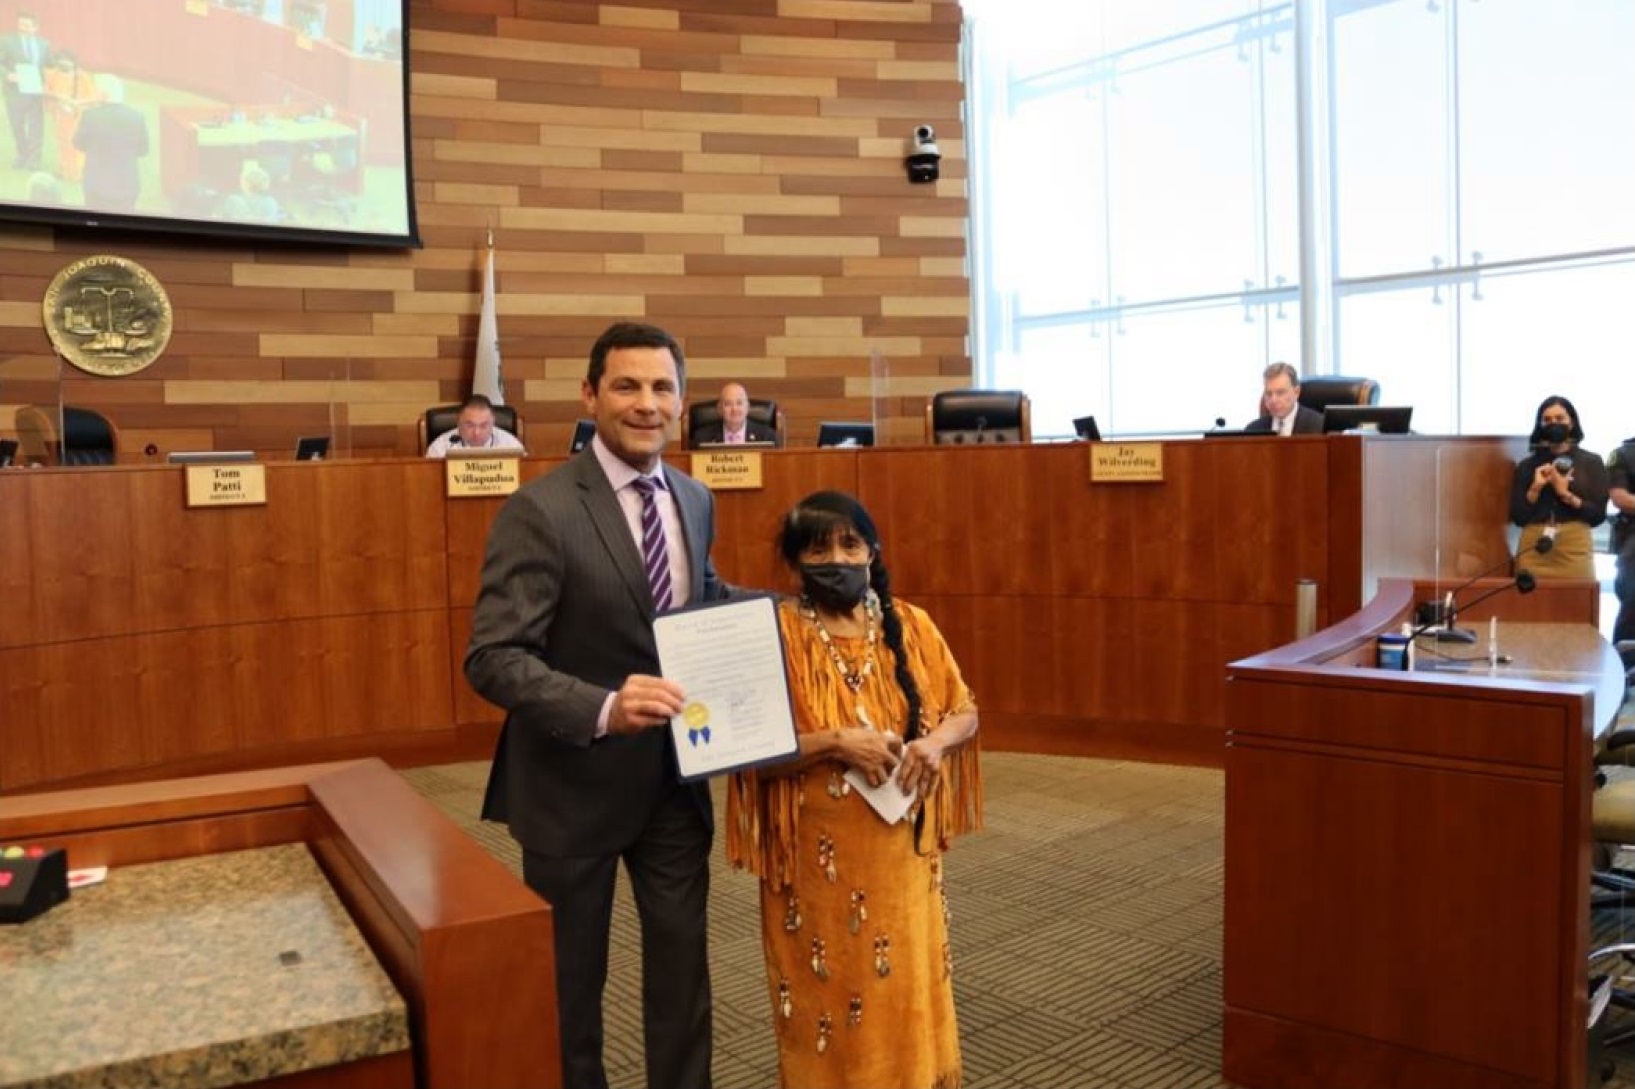 California Valley Miwok Tribal elder Mildred Burley with Tom Patti, holding the Indigenous Peoples’ Day proclamation.